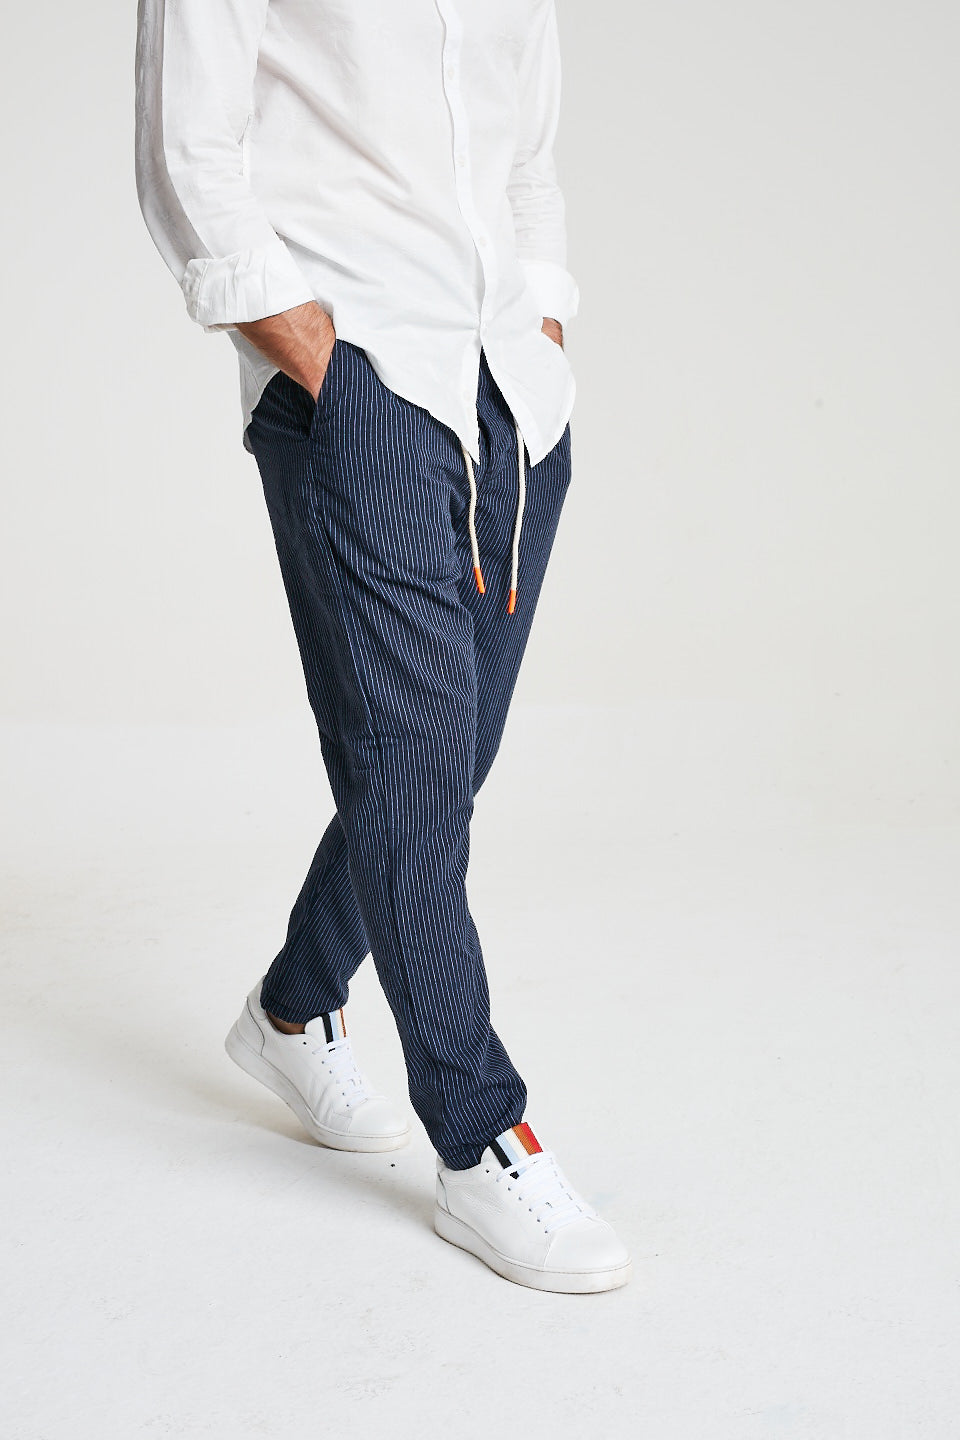 Pin Striped Breezy Denim Knotted Trousers